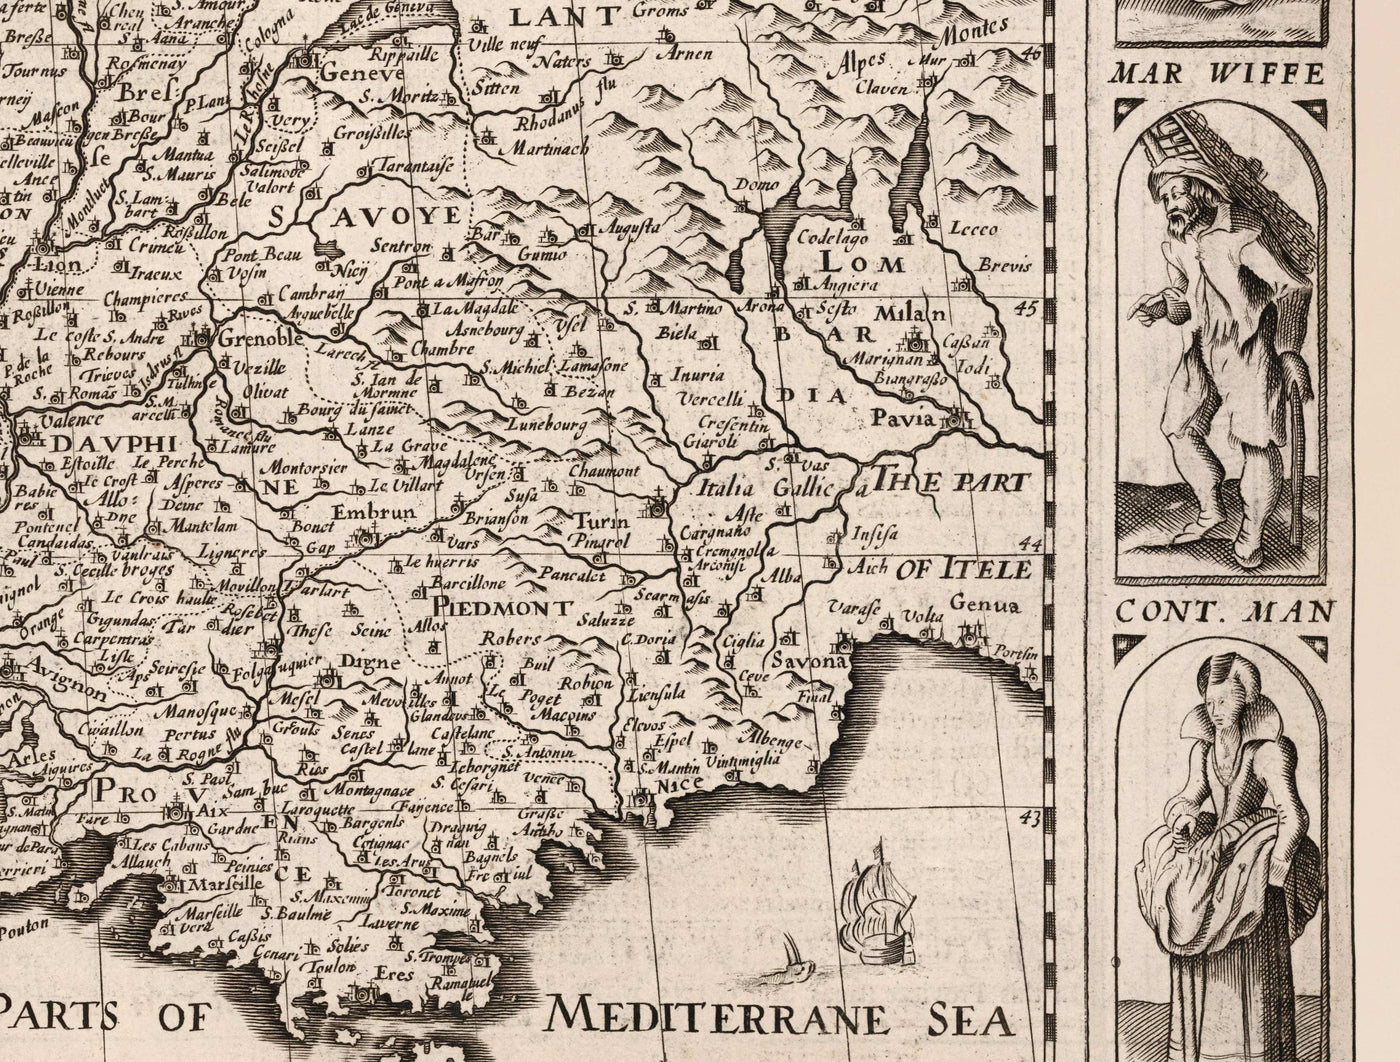 Old Map of France, 1627 by John Speed - Belgium, Normandy, Brittany, Cote d'Azur, Pyrenees